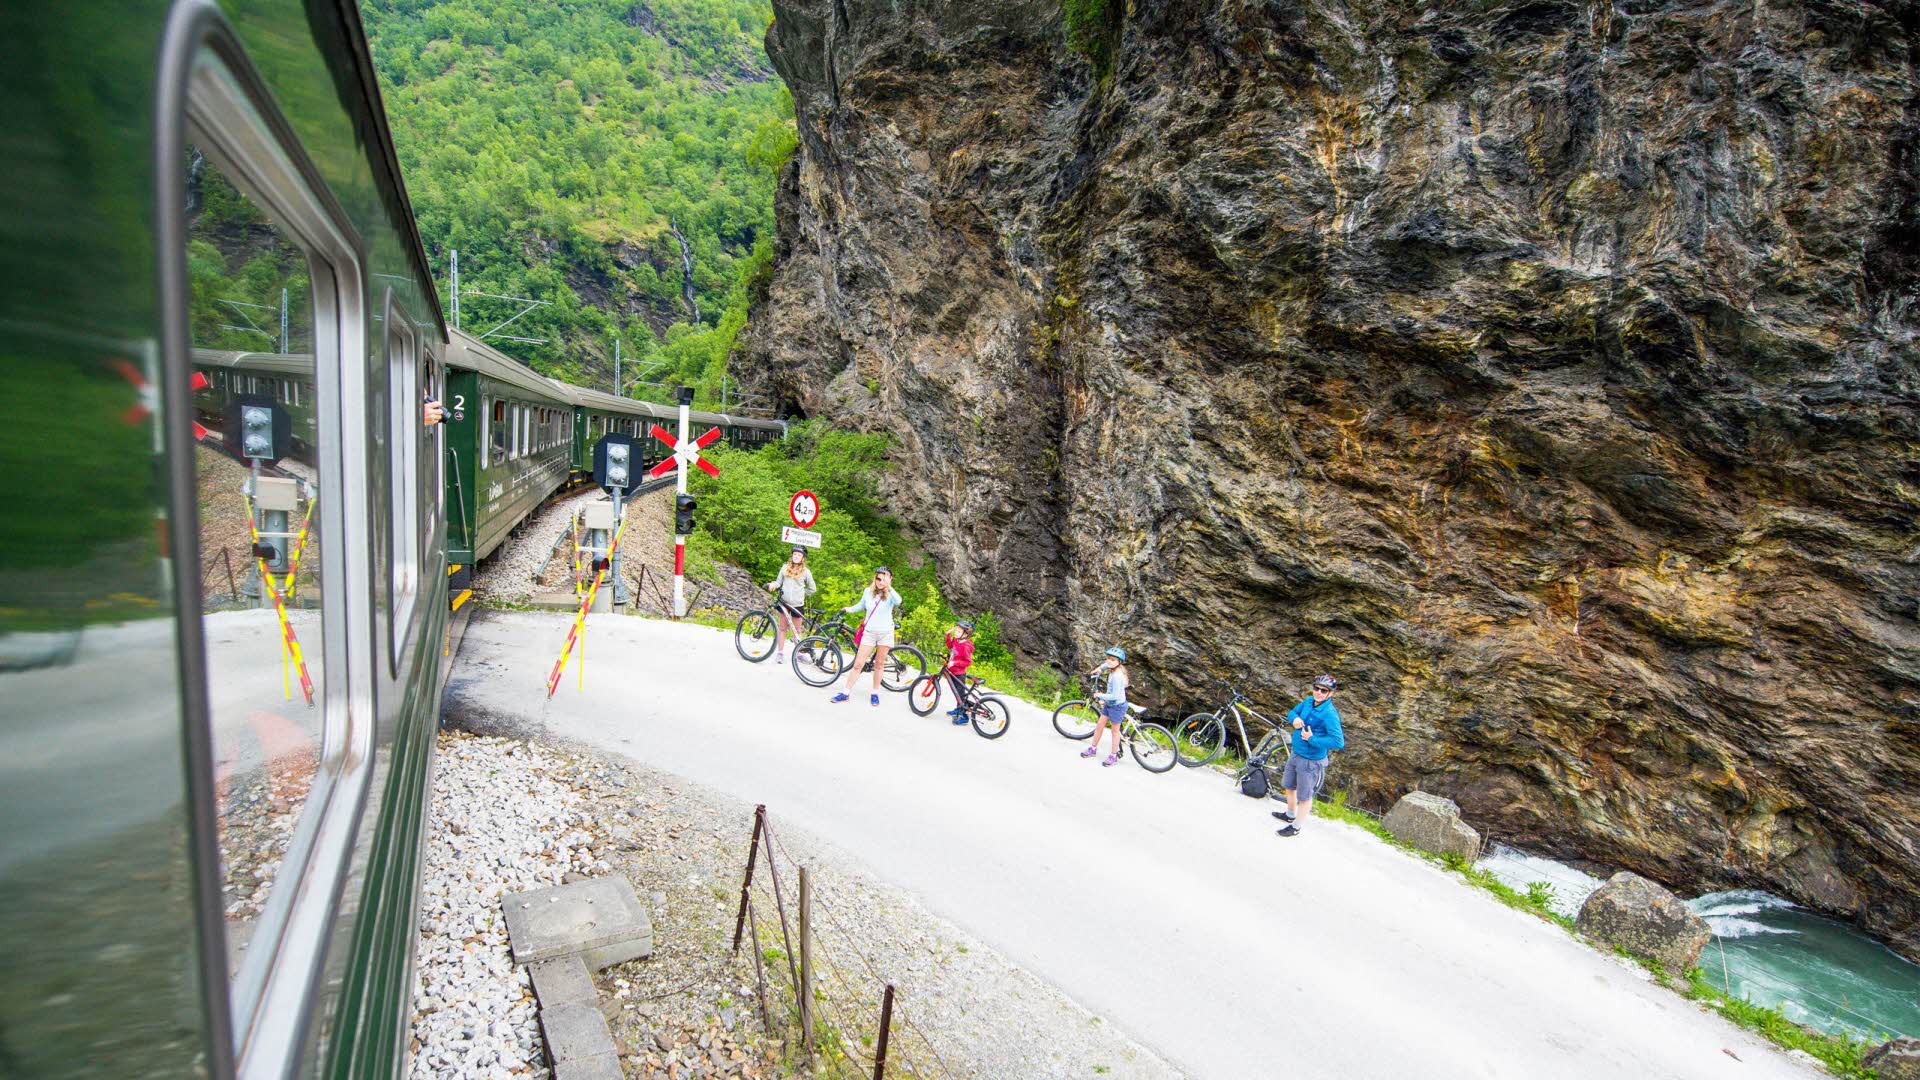 Cyclists on the Rallarvegen in the Flåm Valley waiting for a train to pass 